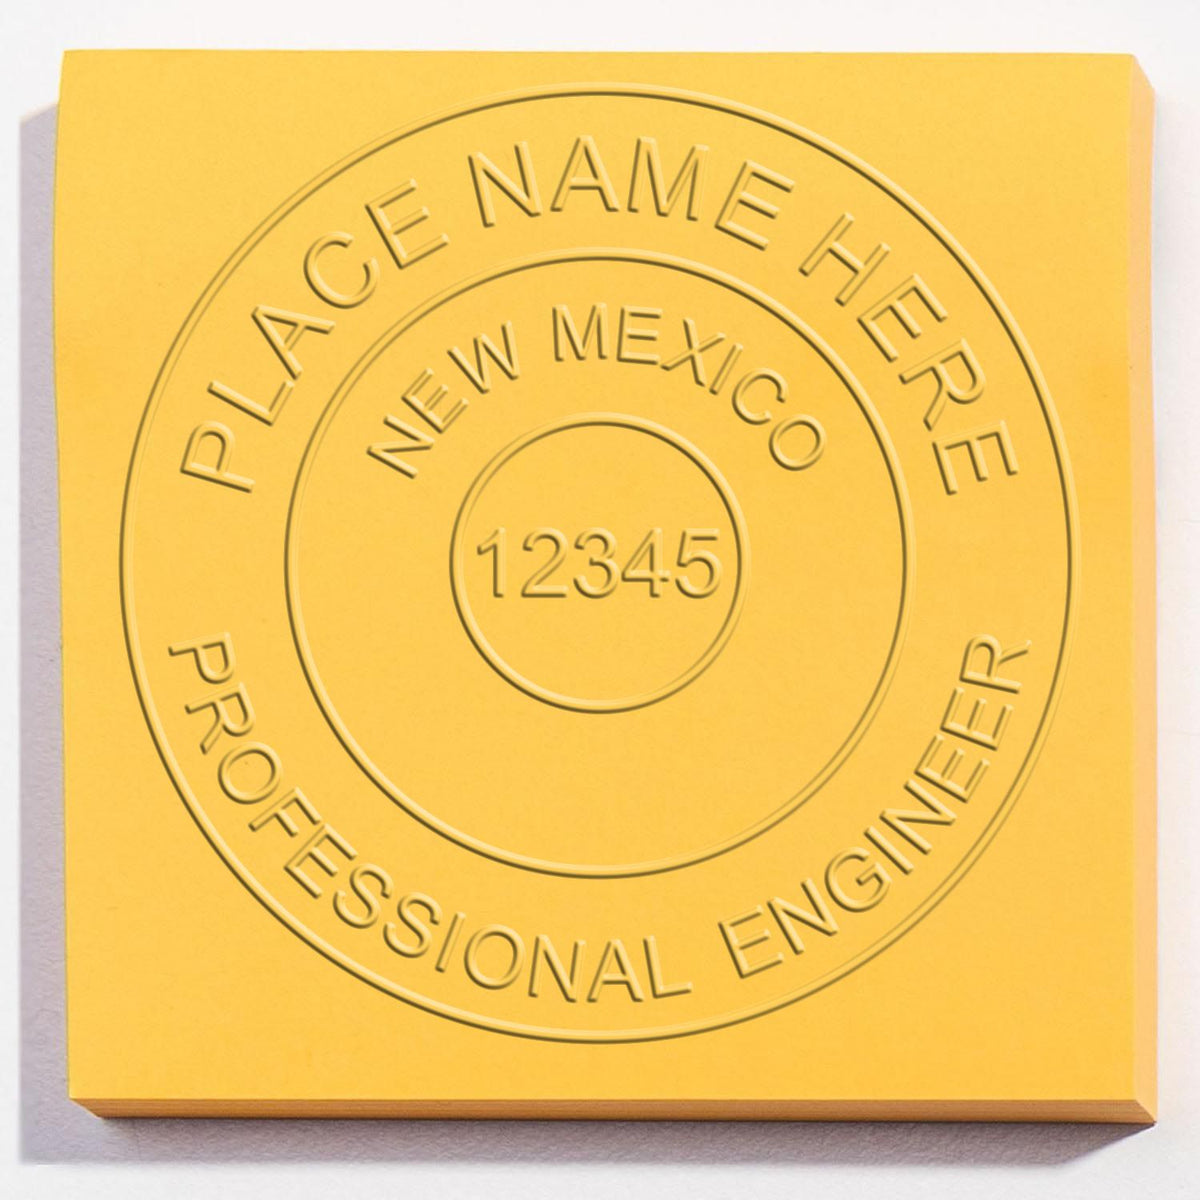 An alternative view of the Heavy Duty Cast Iron New Mexico Engineer Seal Embosser stamped on a sheet of paper showing the image in use